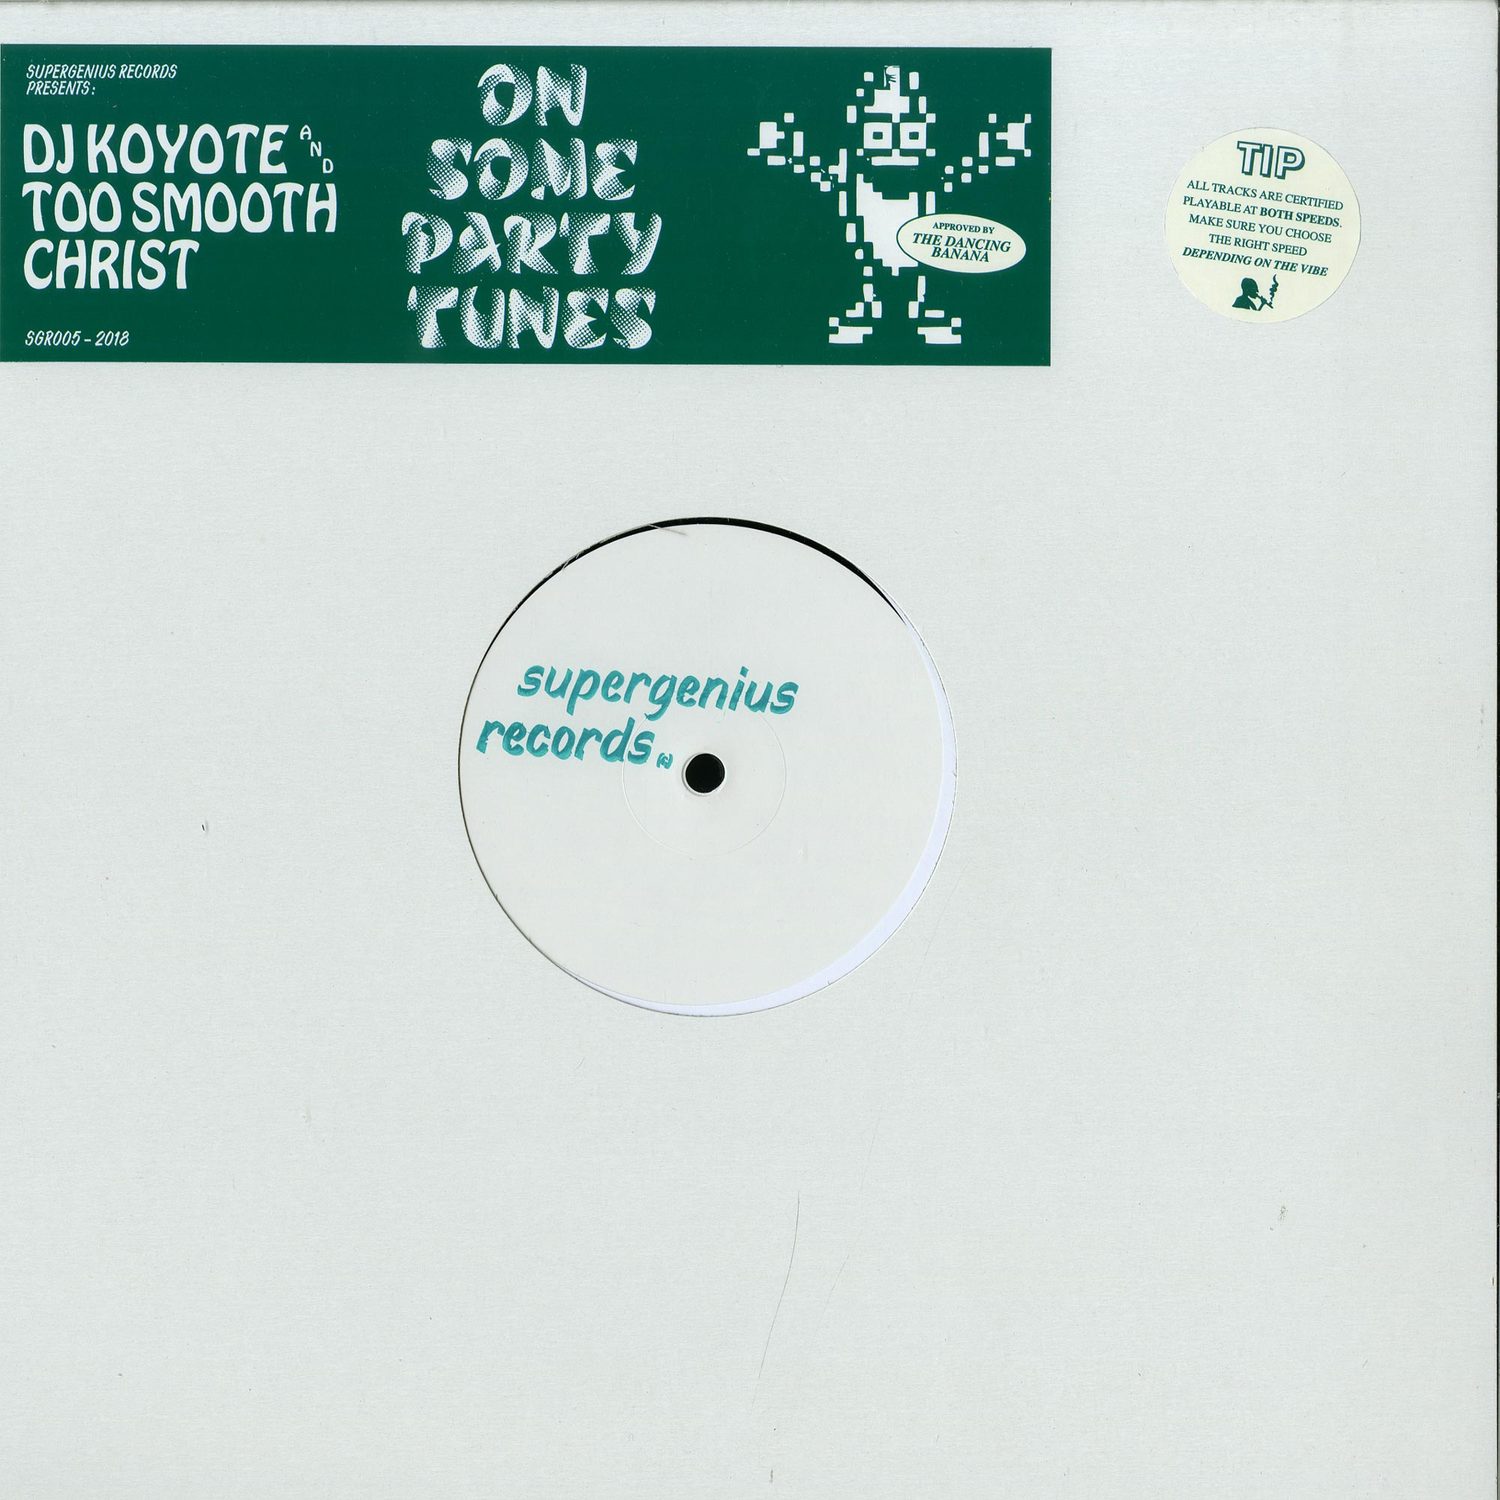 DJ Koyote & Too Smooth Christ - ON SOME PARTY TUNES